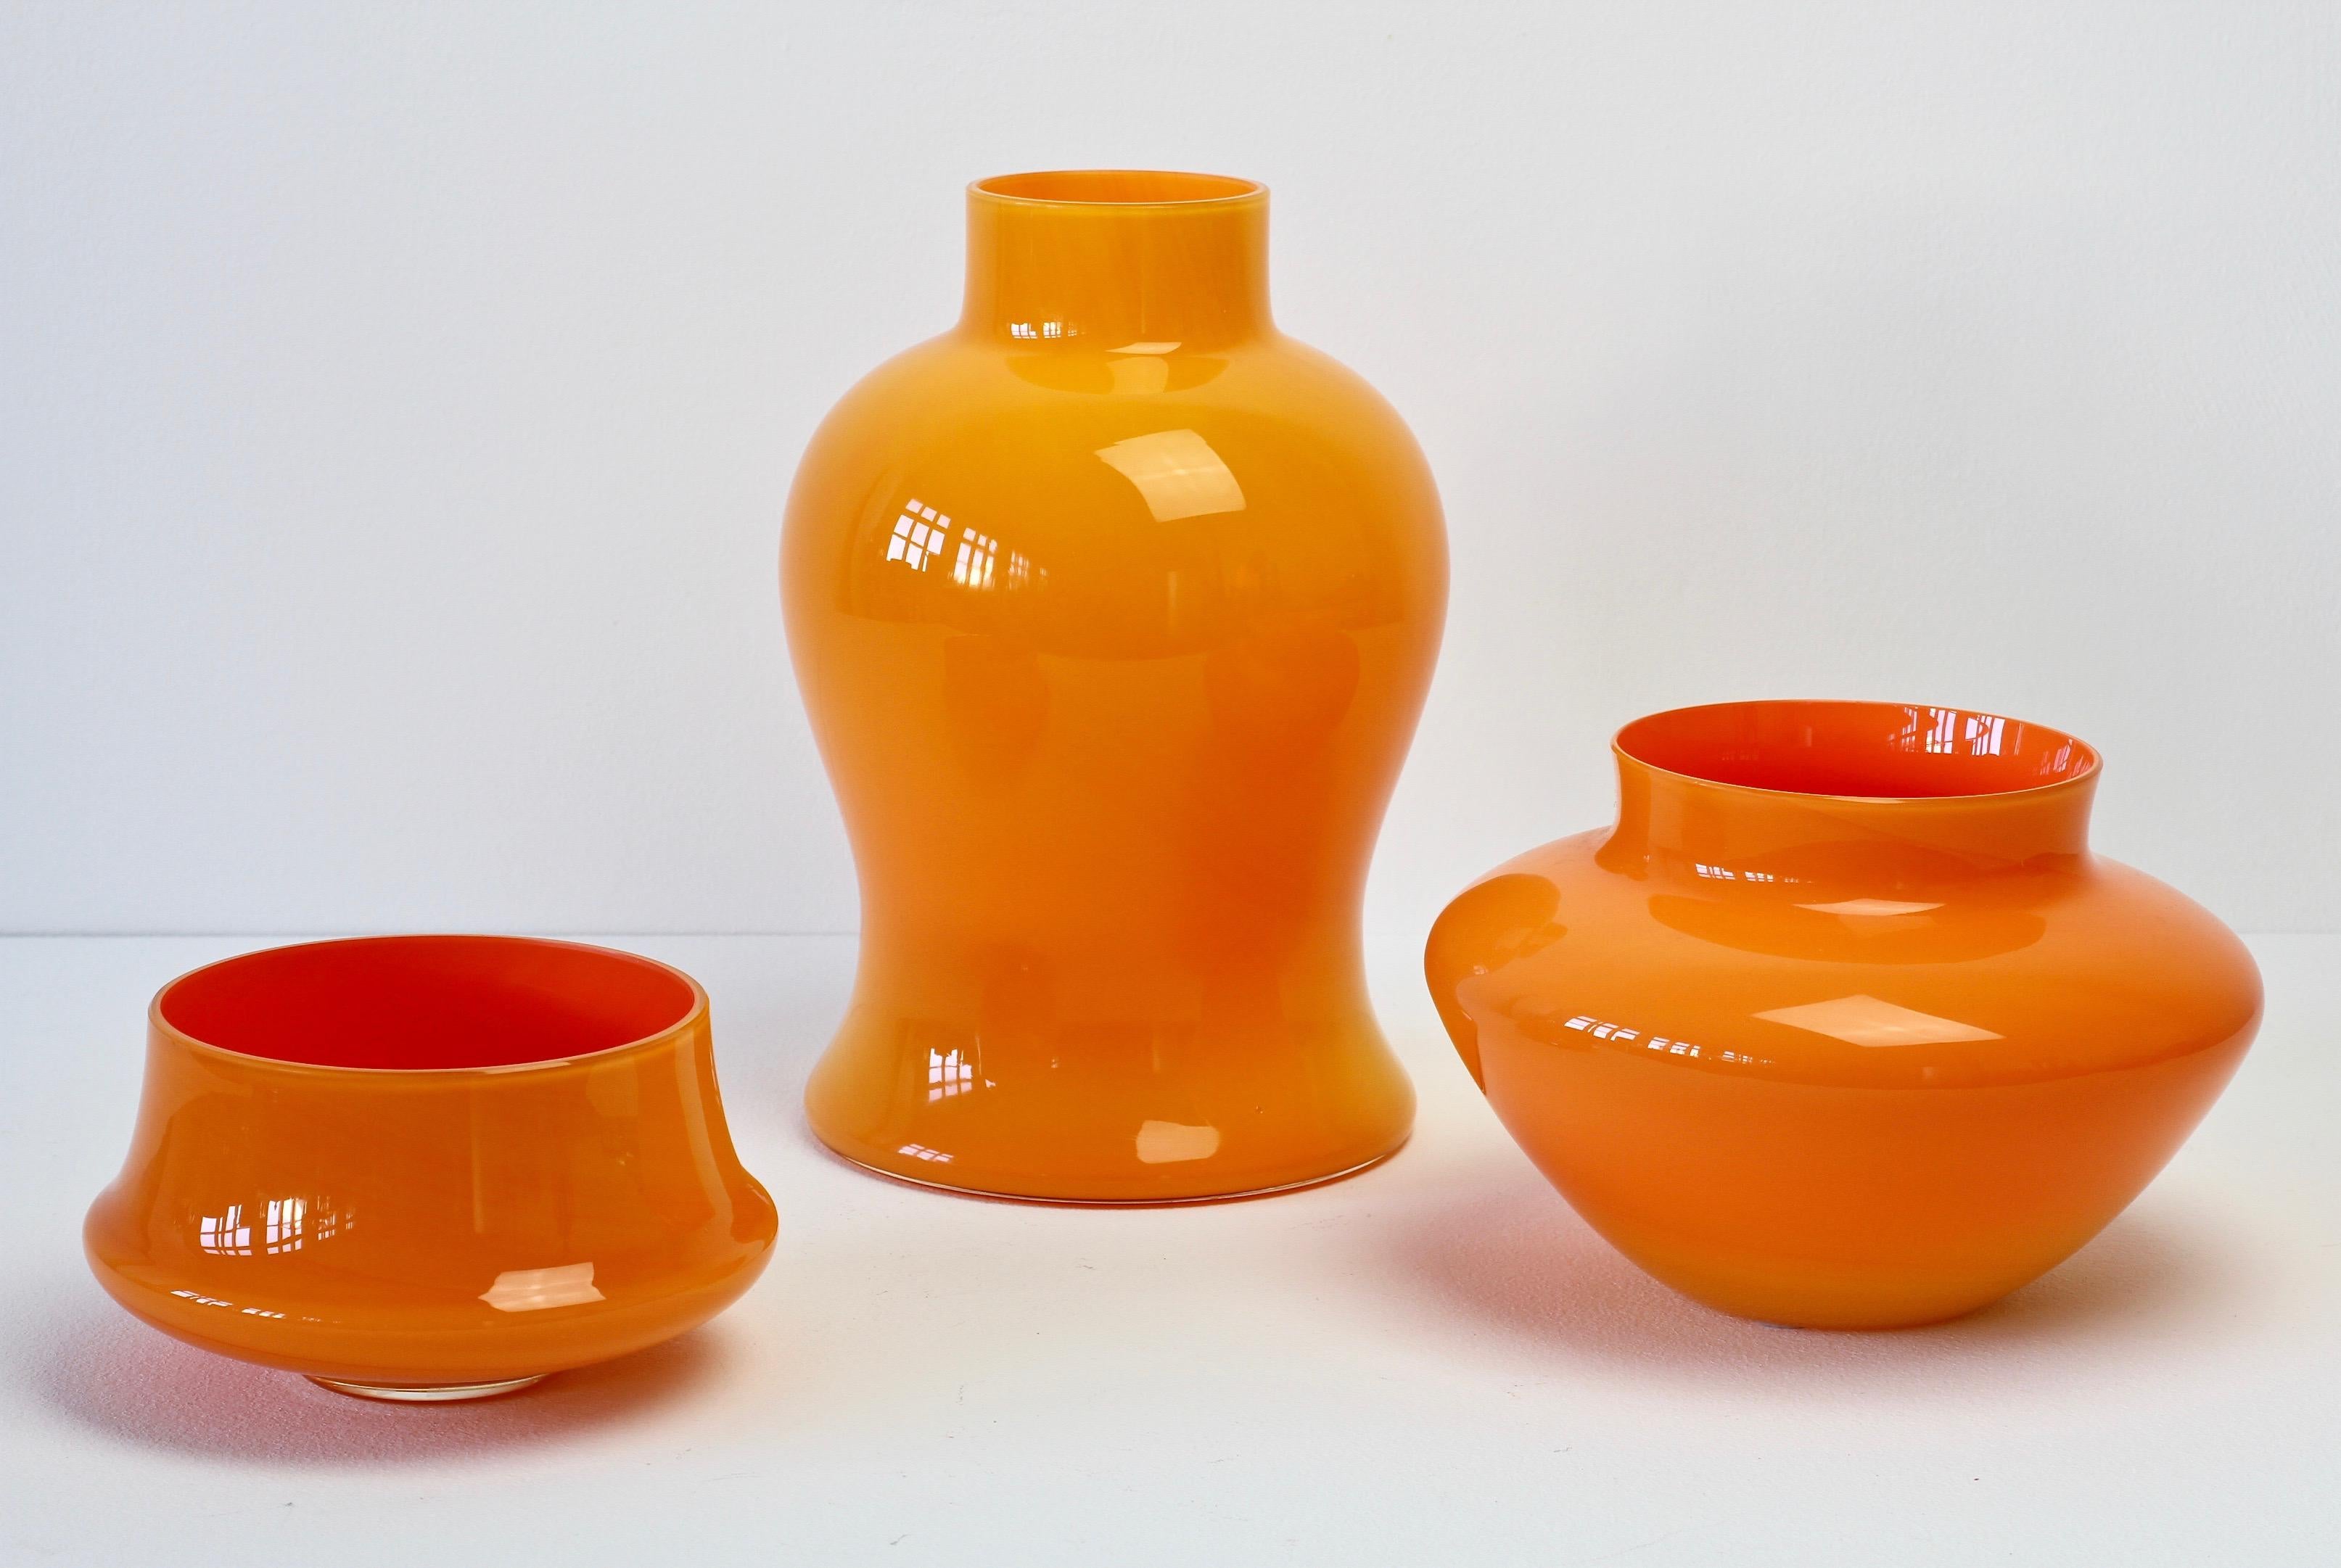 Cenedese set, group, ensemble or collection of Murano glass vases, bowls or vessels, made in Italy. Particularly striking are the forms, they have all the characteristics of hand thrown pottery with the unmistakable look and feel of glass.

A fun,